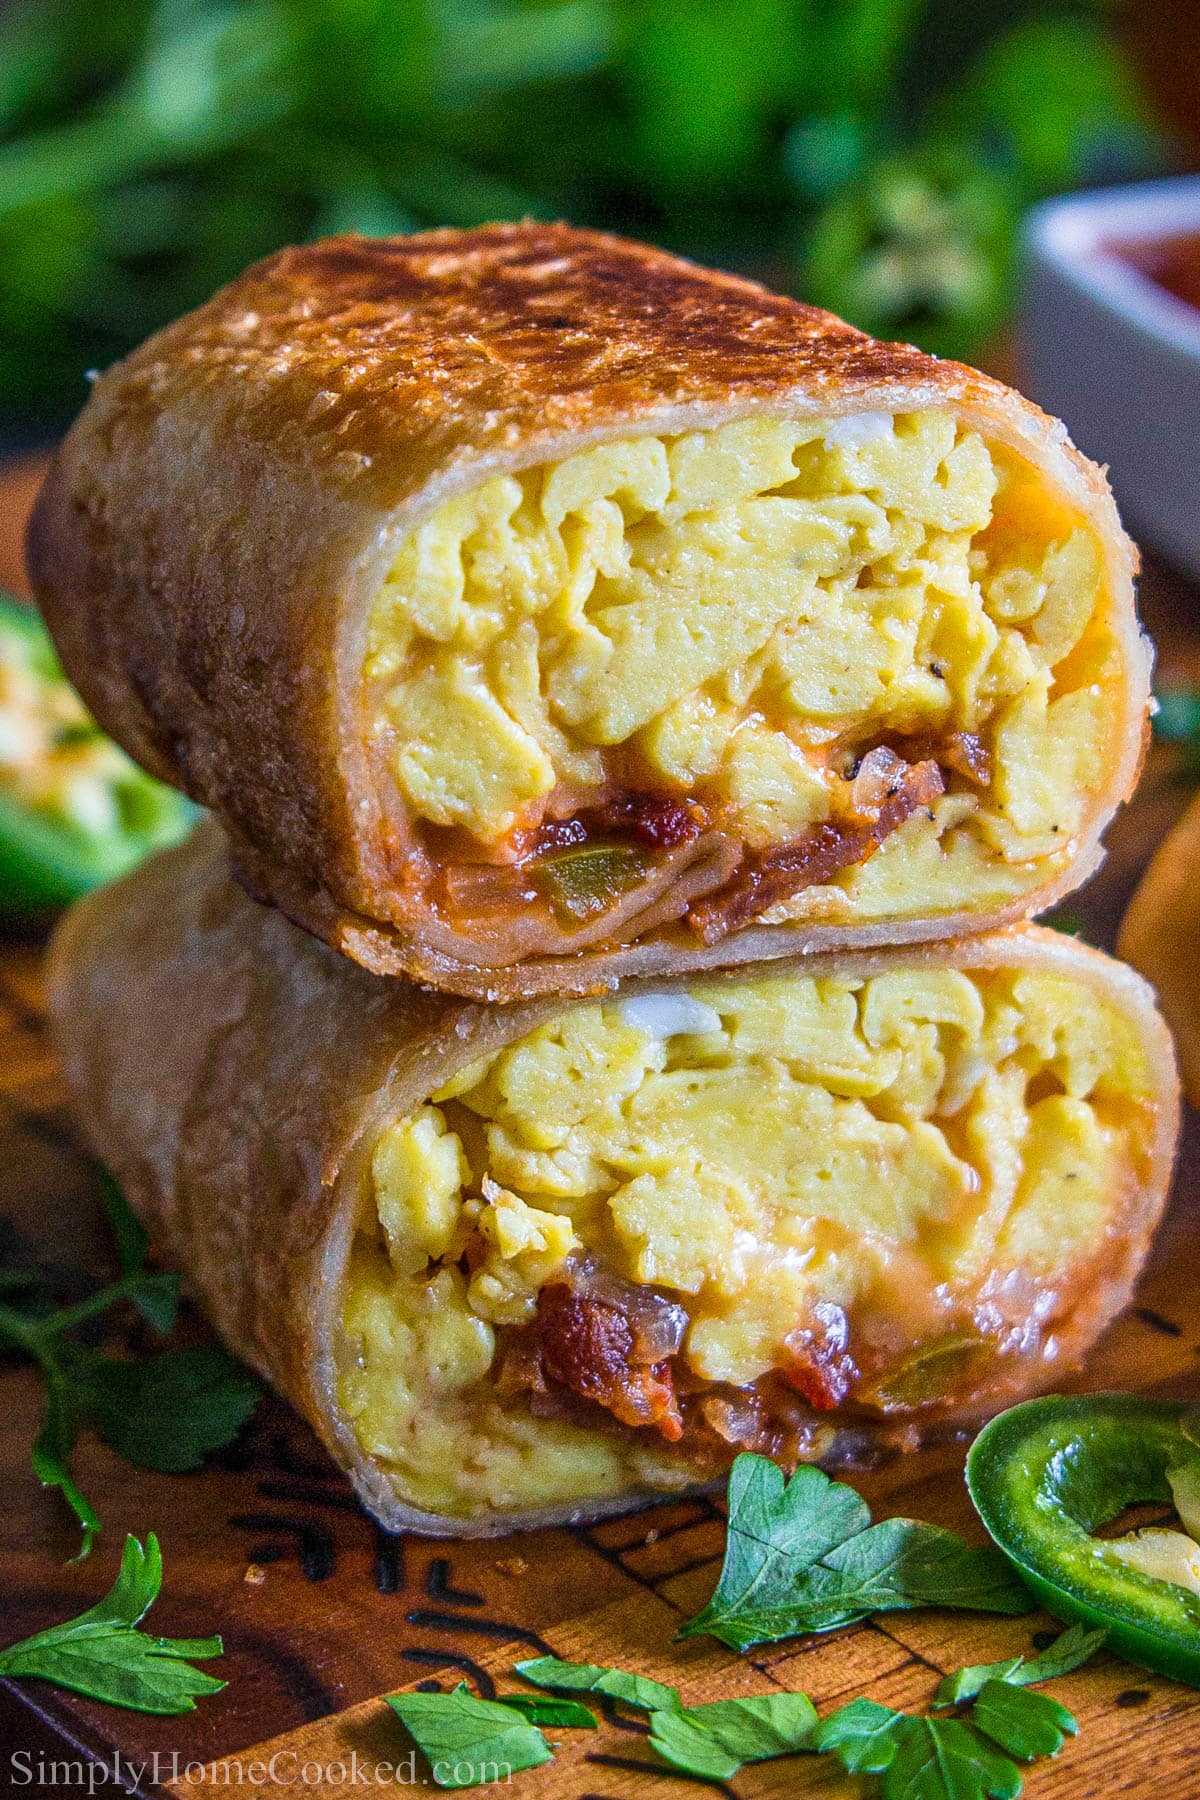 Breakfast Burritos with eggs, bacon, cheesy, and salsa cut in half and stacked.